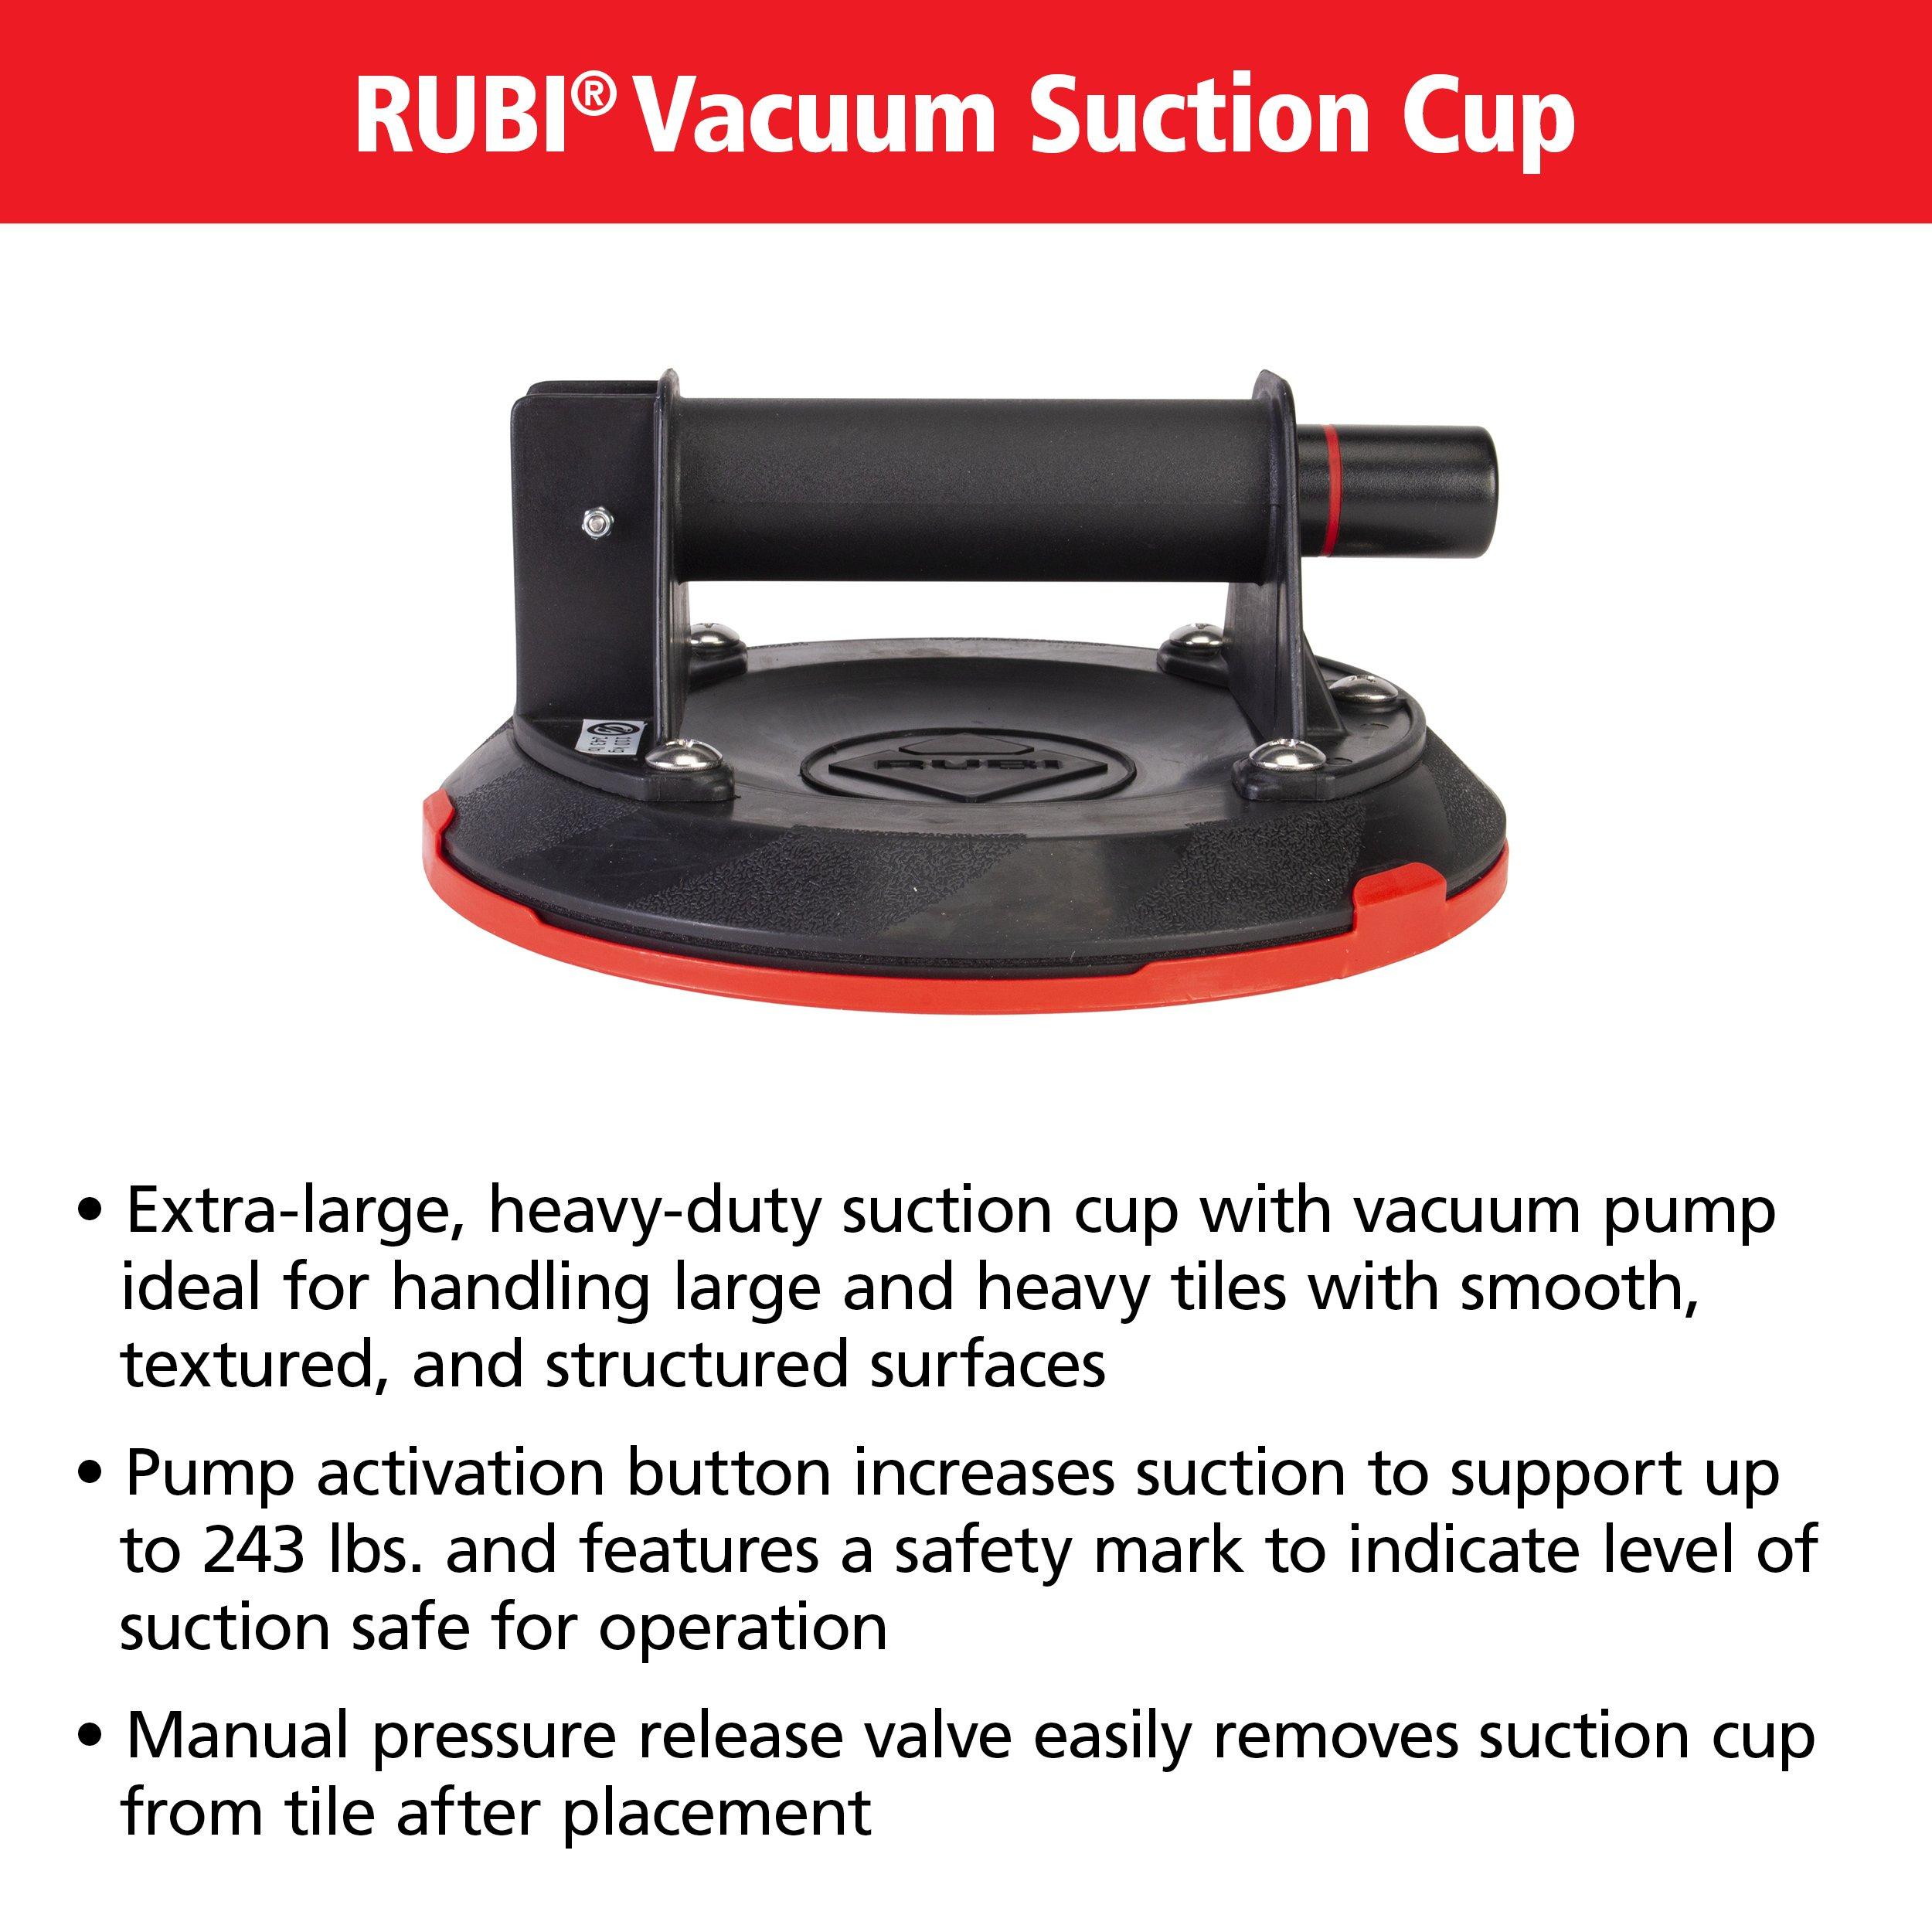 Vacuum Suction cups - Reliable and Fast handling